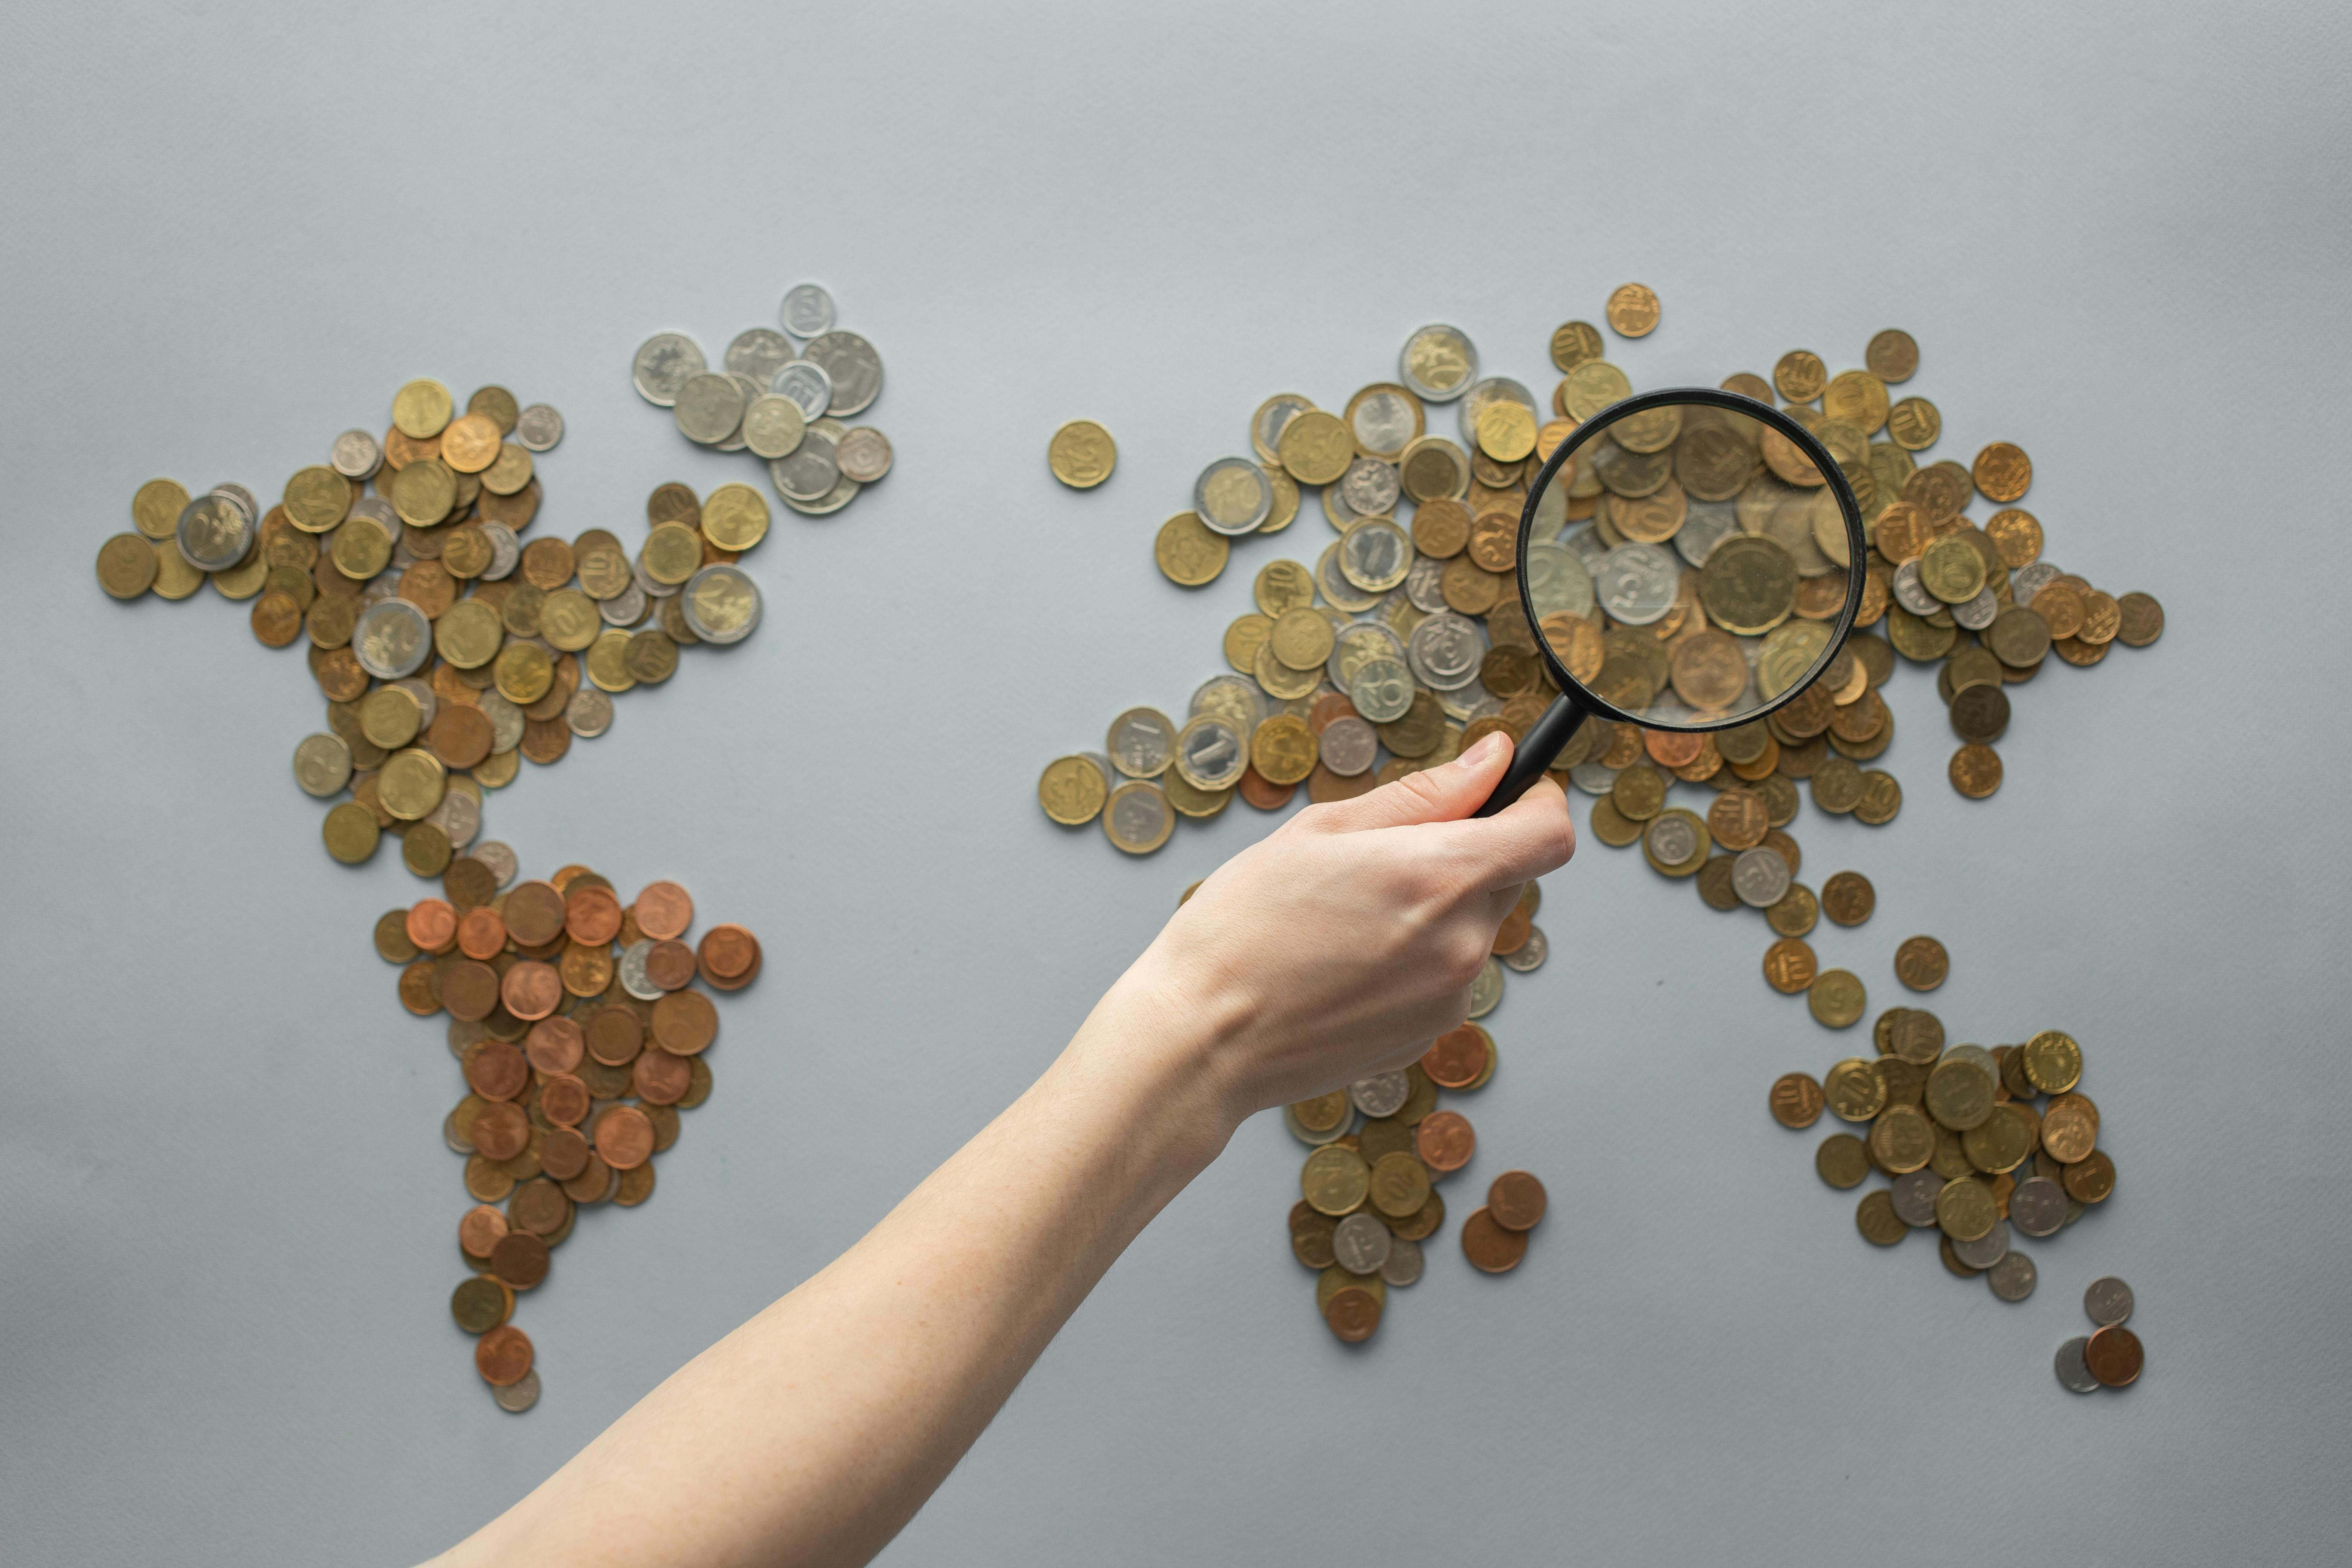 Magnifying glass and coins at the background, Stock image